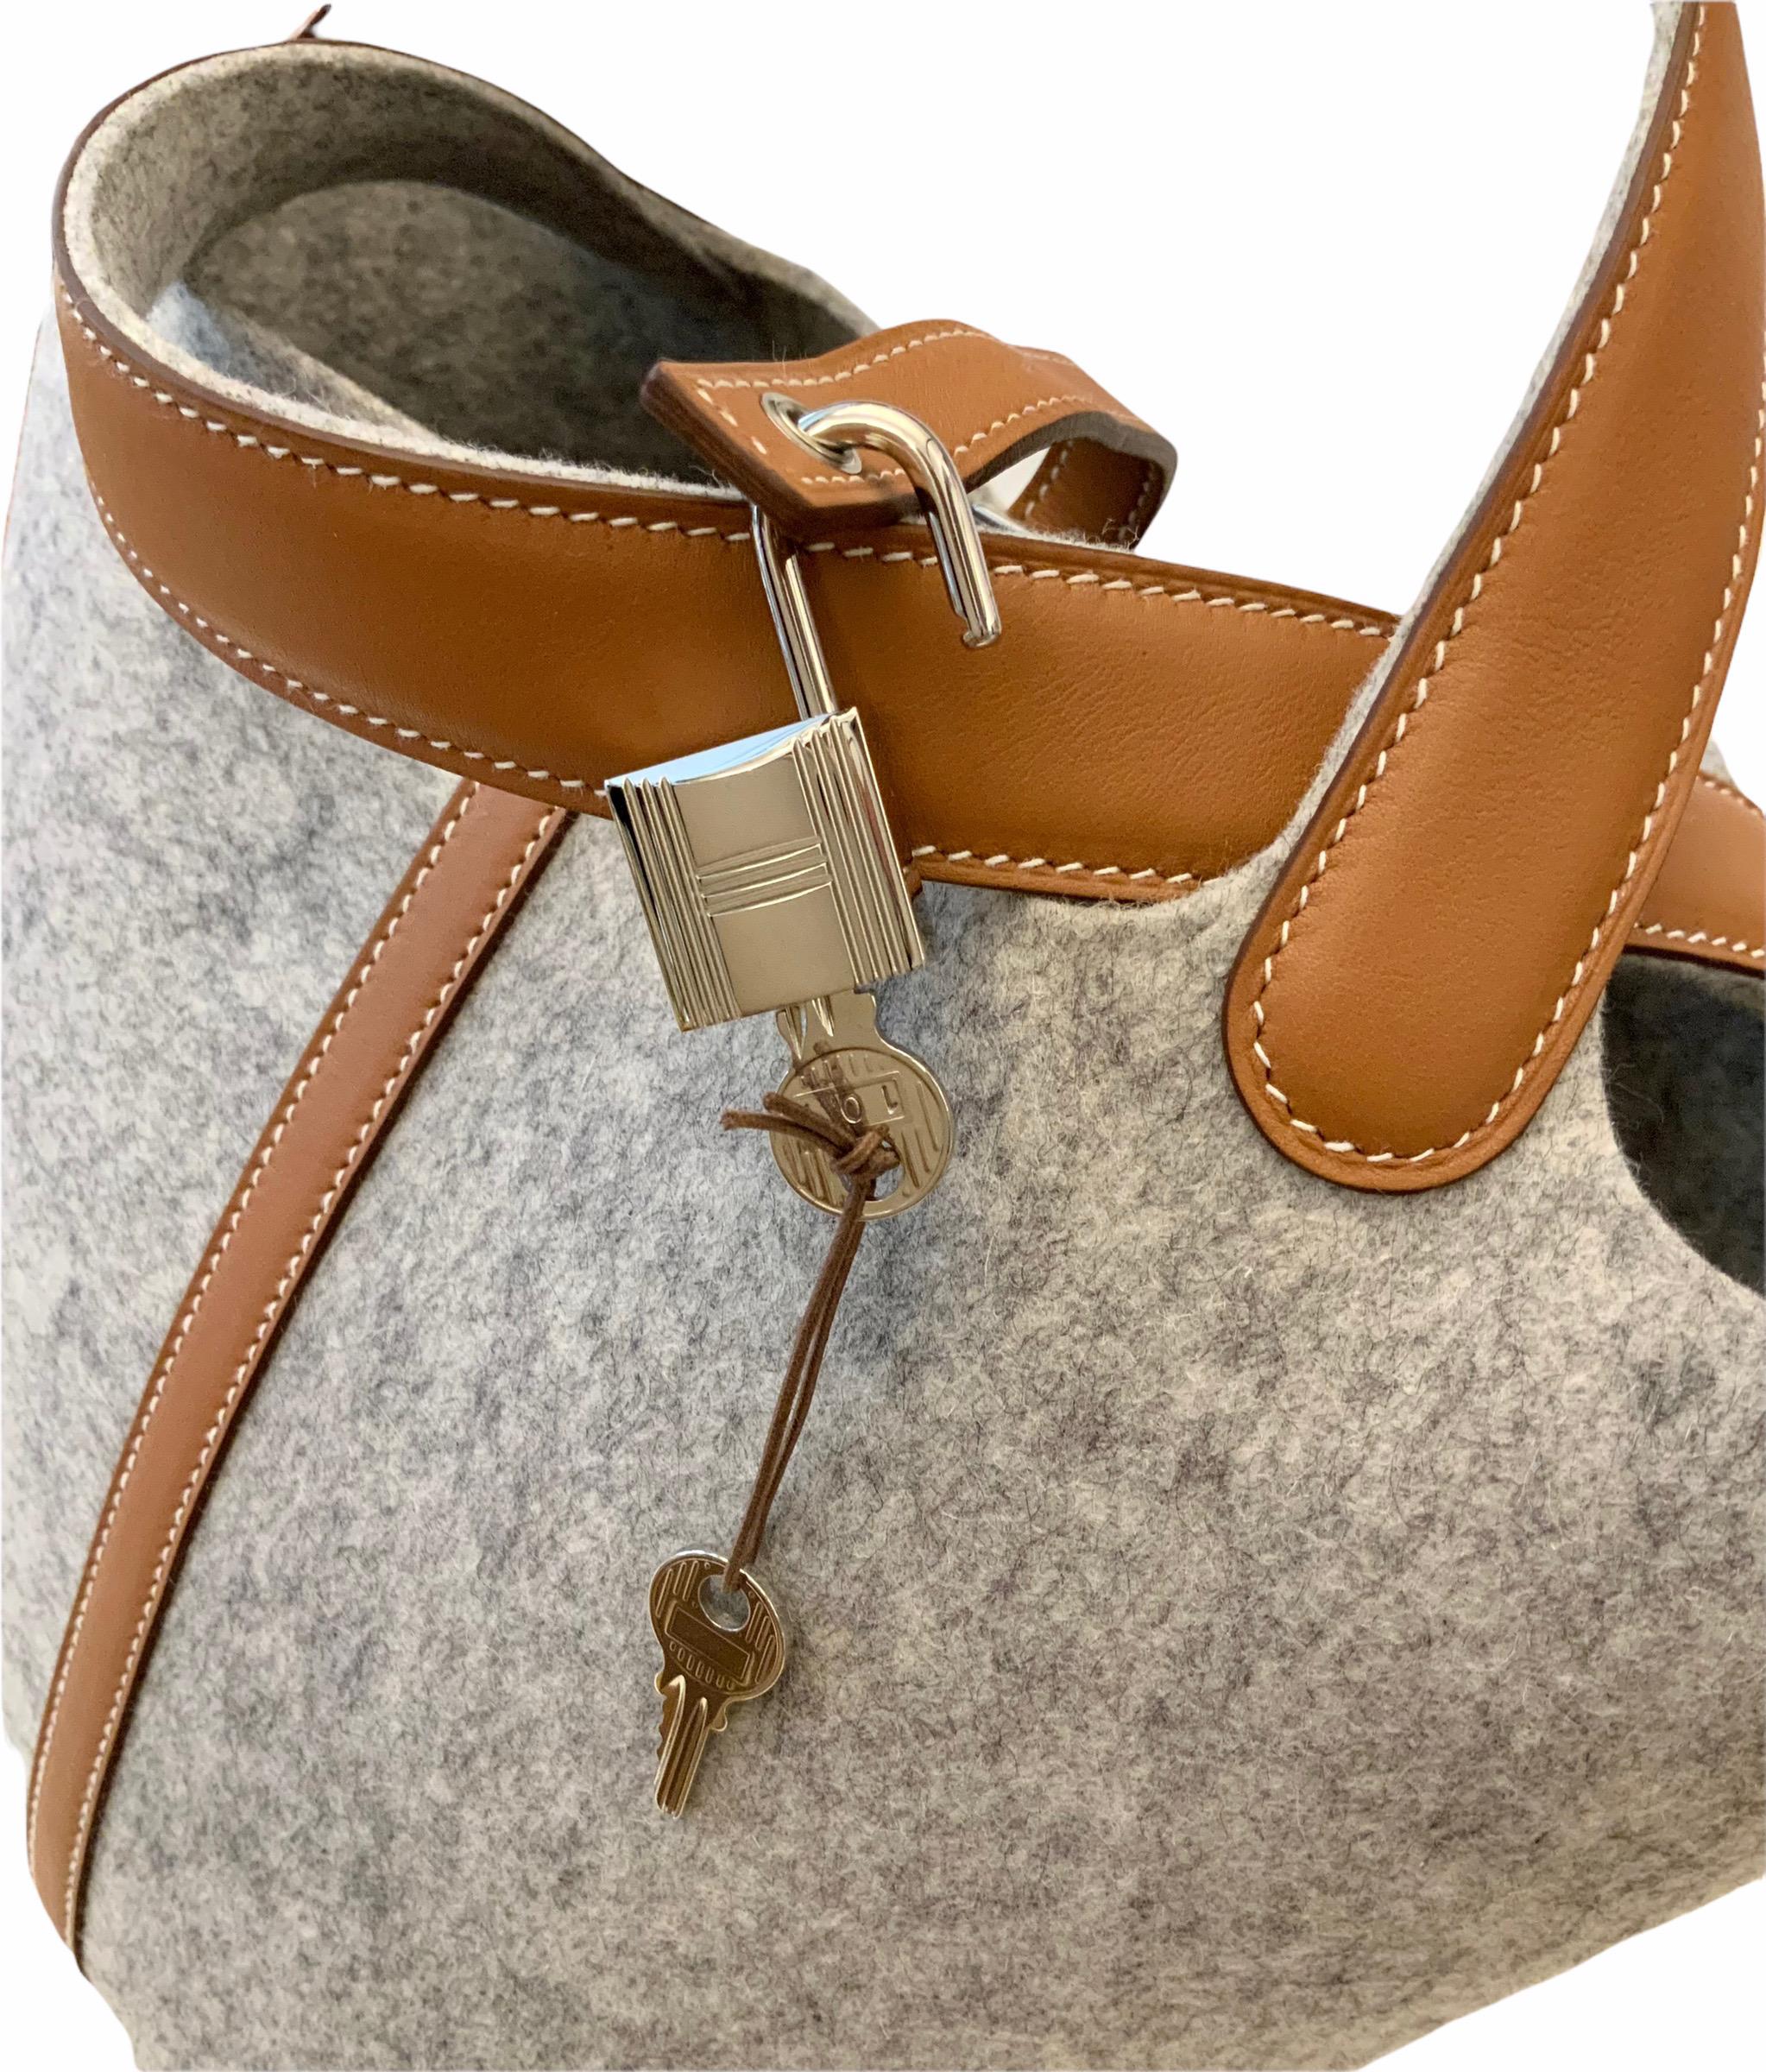 This pre-owned but as new Picotin Lock 18 bag is a Limited Edition of the Picotin Line.
Using Felt as the main material, it is holding its shape well and can be used for a longer time than the leather versions.
Its Barenia leather trim with